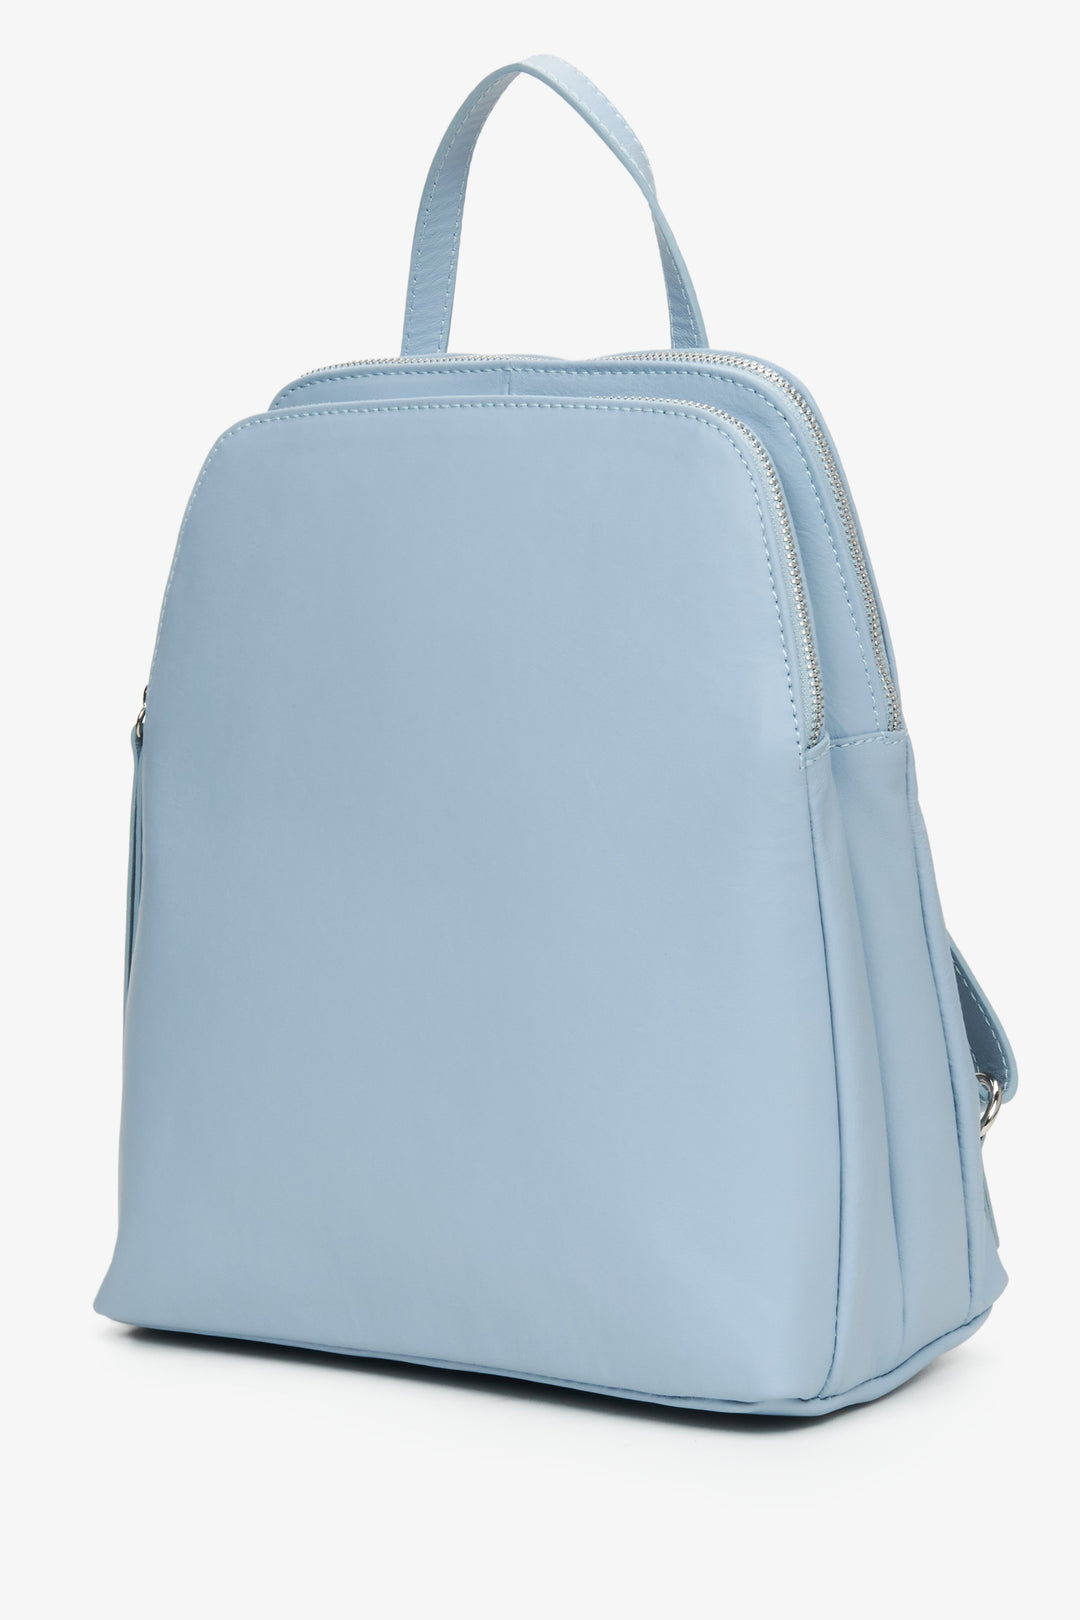 Women's light blue leather backpack by Estro.